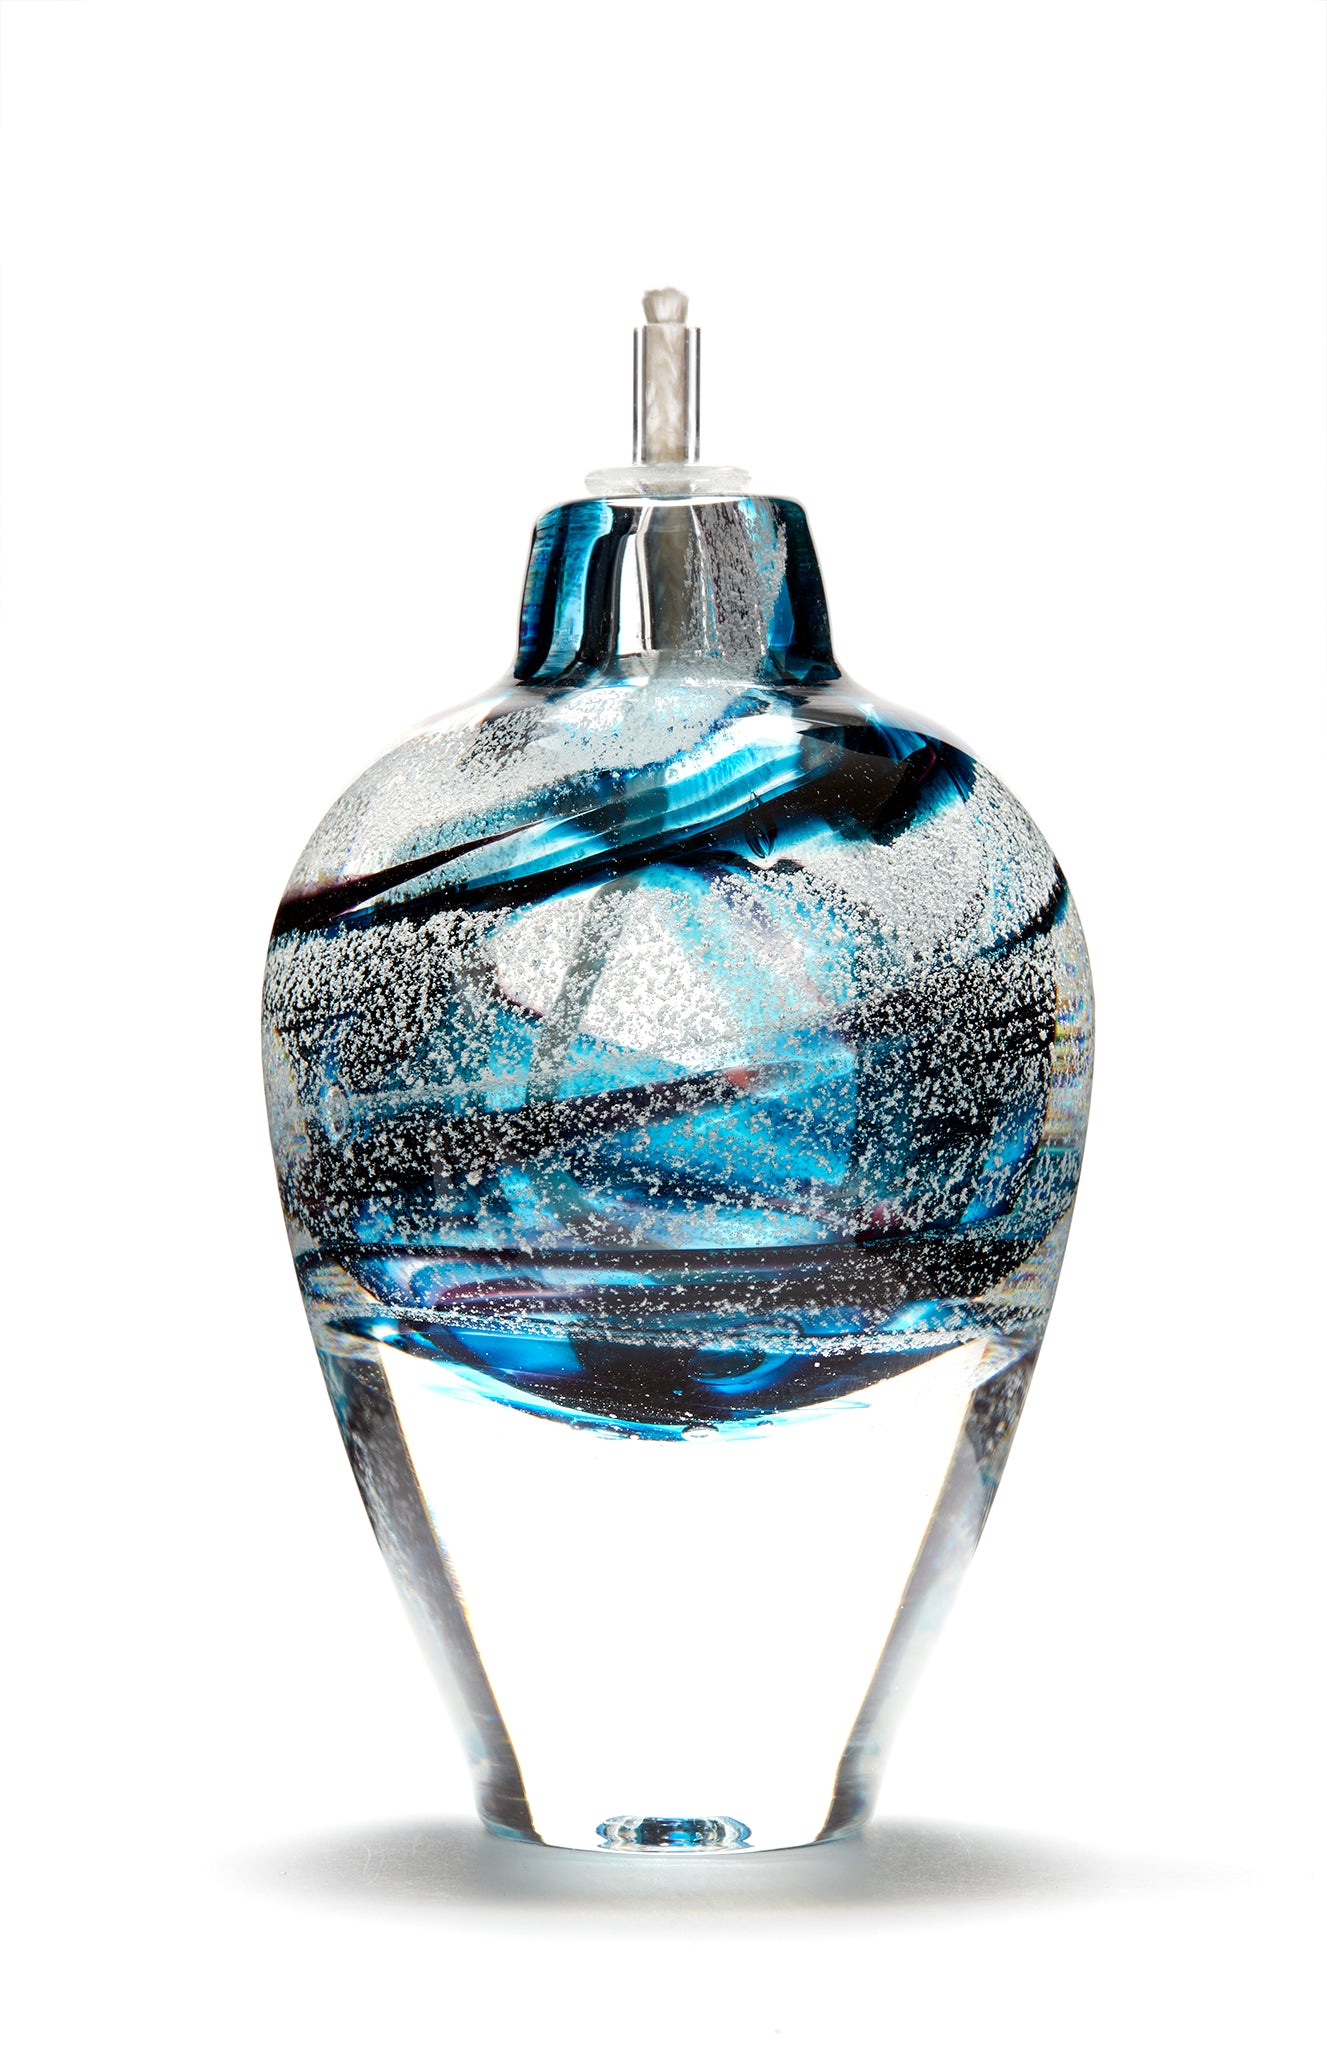 Memorial glass art tall eternal flame oil lamp with cremation ash. Teal blue and purple glass. Colour combination is called "Amethyst Teal."